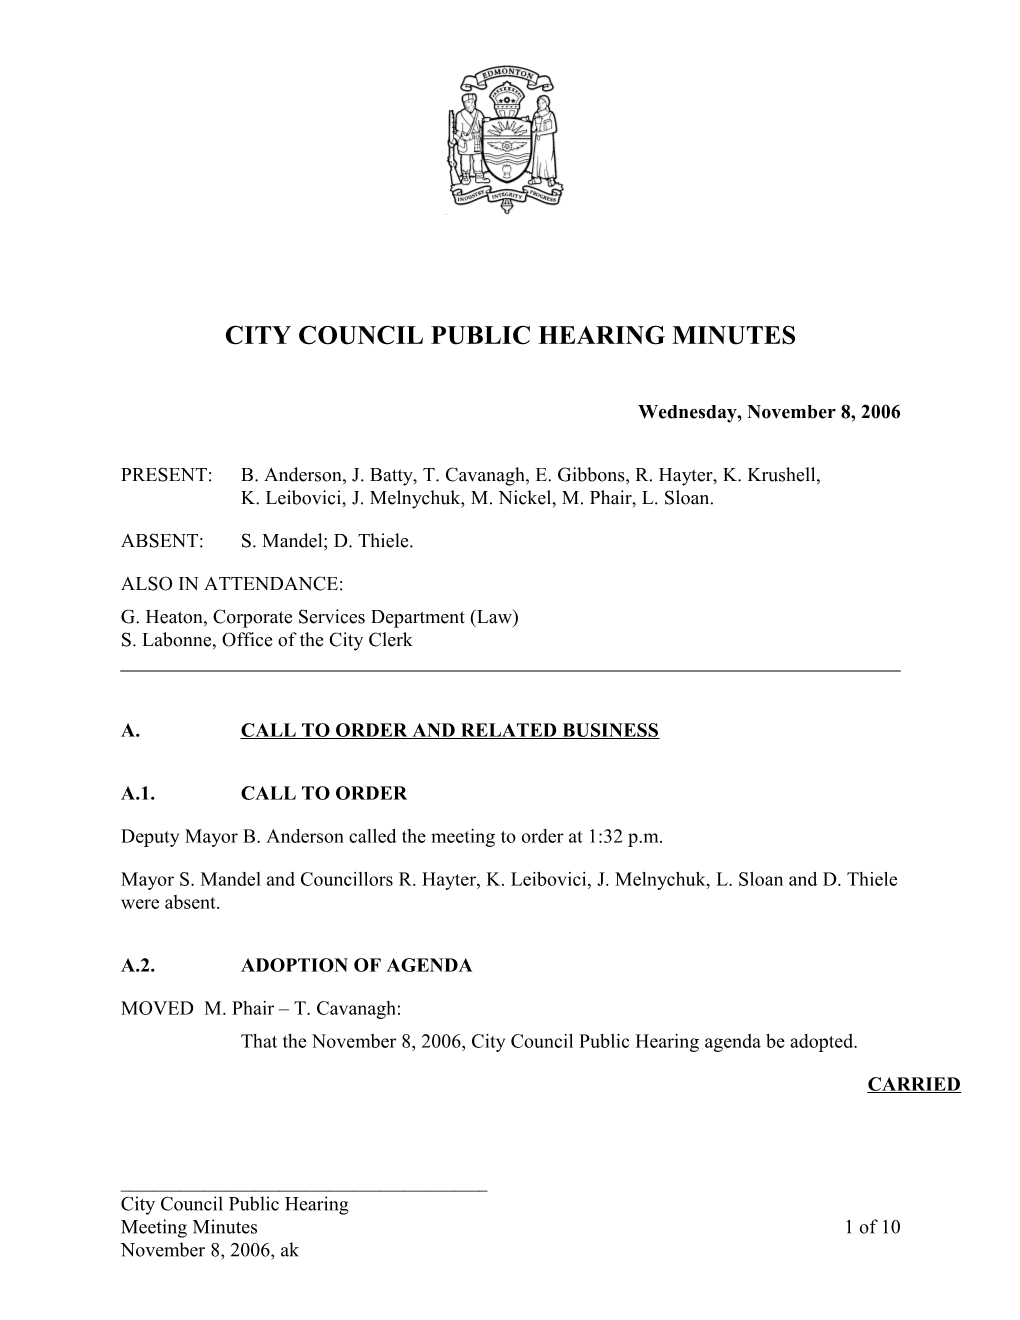 Minutes for City Council November 8, 2006 Meeting